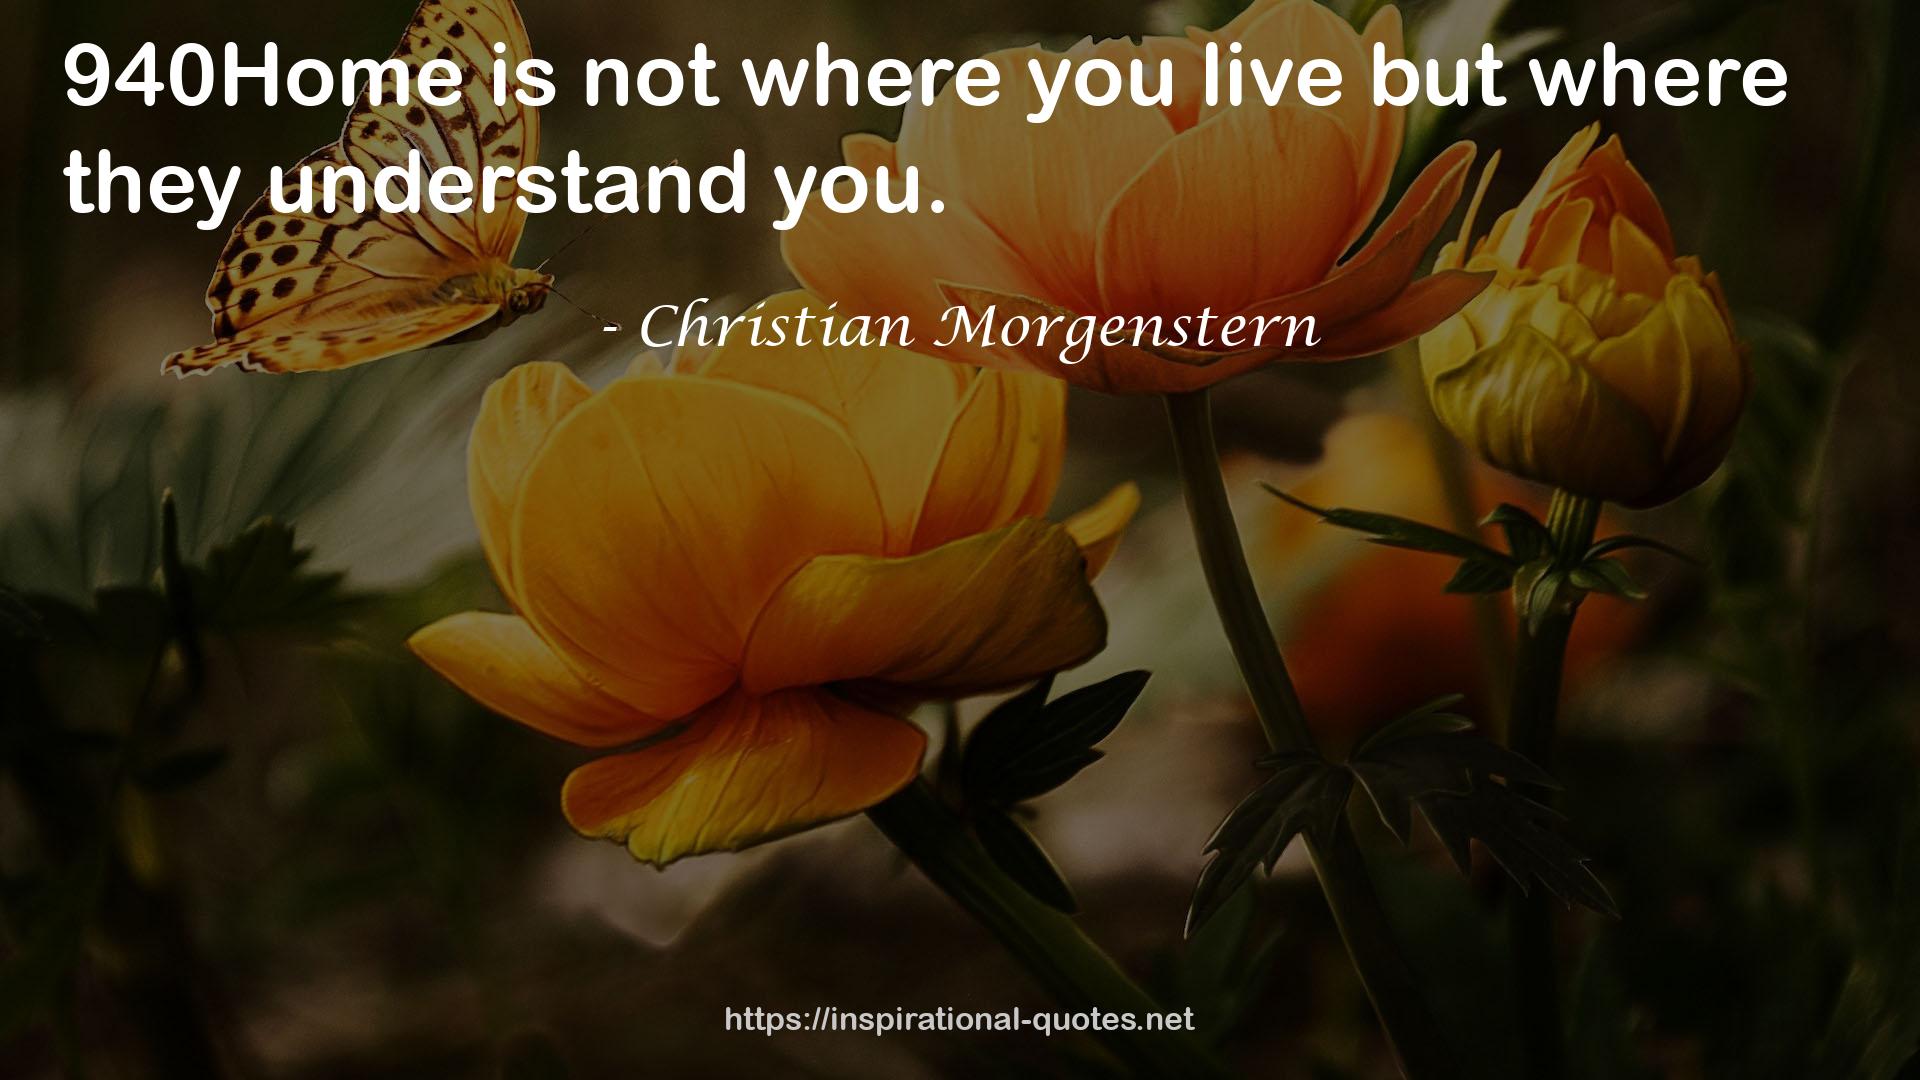 Christian Morgenstern QUOTES